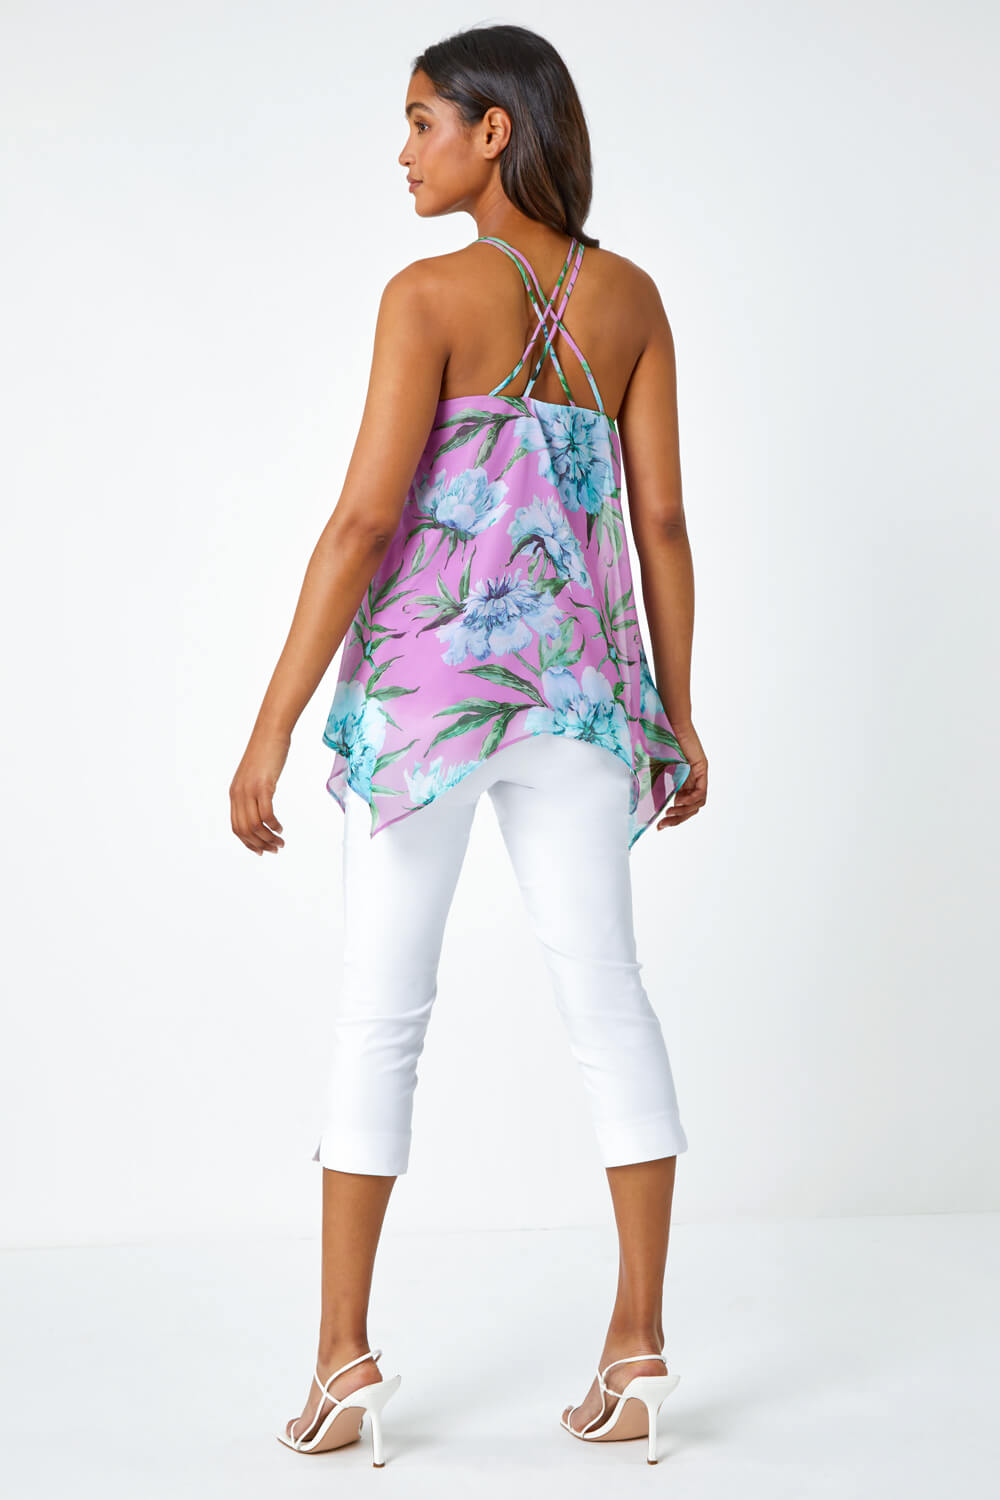 PINK Sleeveless Floral Double Layer Top, Image 4 of 6